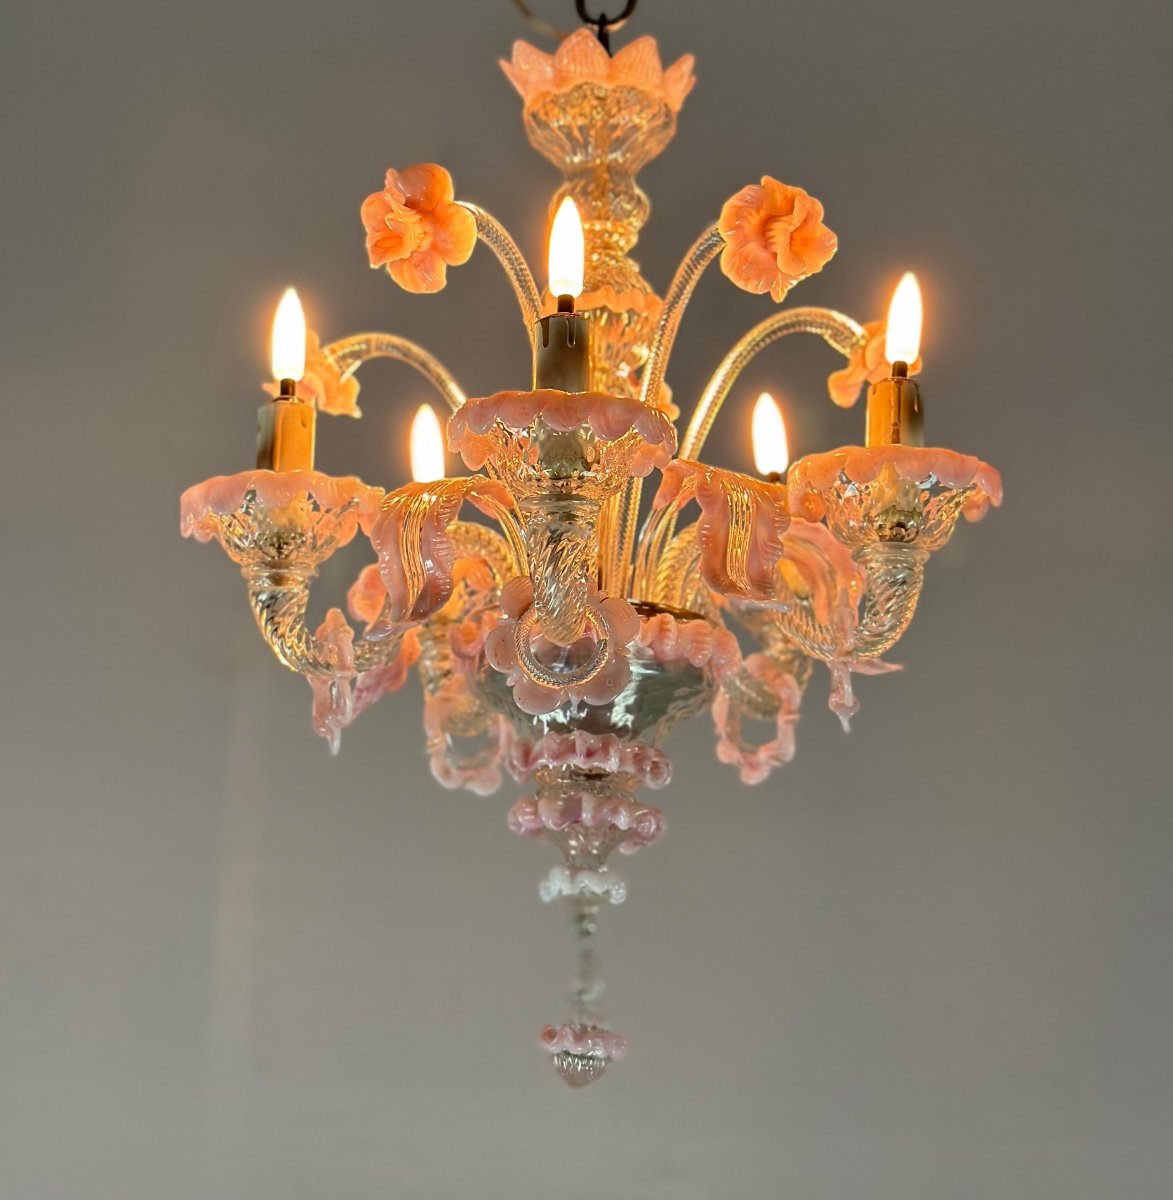 Small Venetian Chandelier In Colorless And Pink Murano Glass 5 Arms Of Light Circa 1920